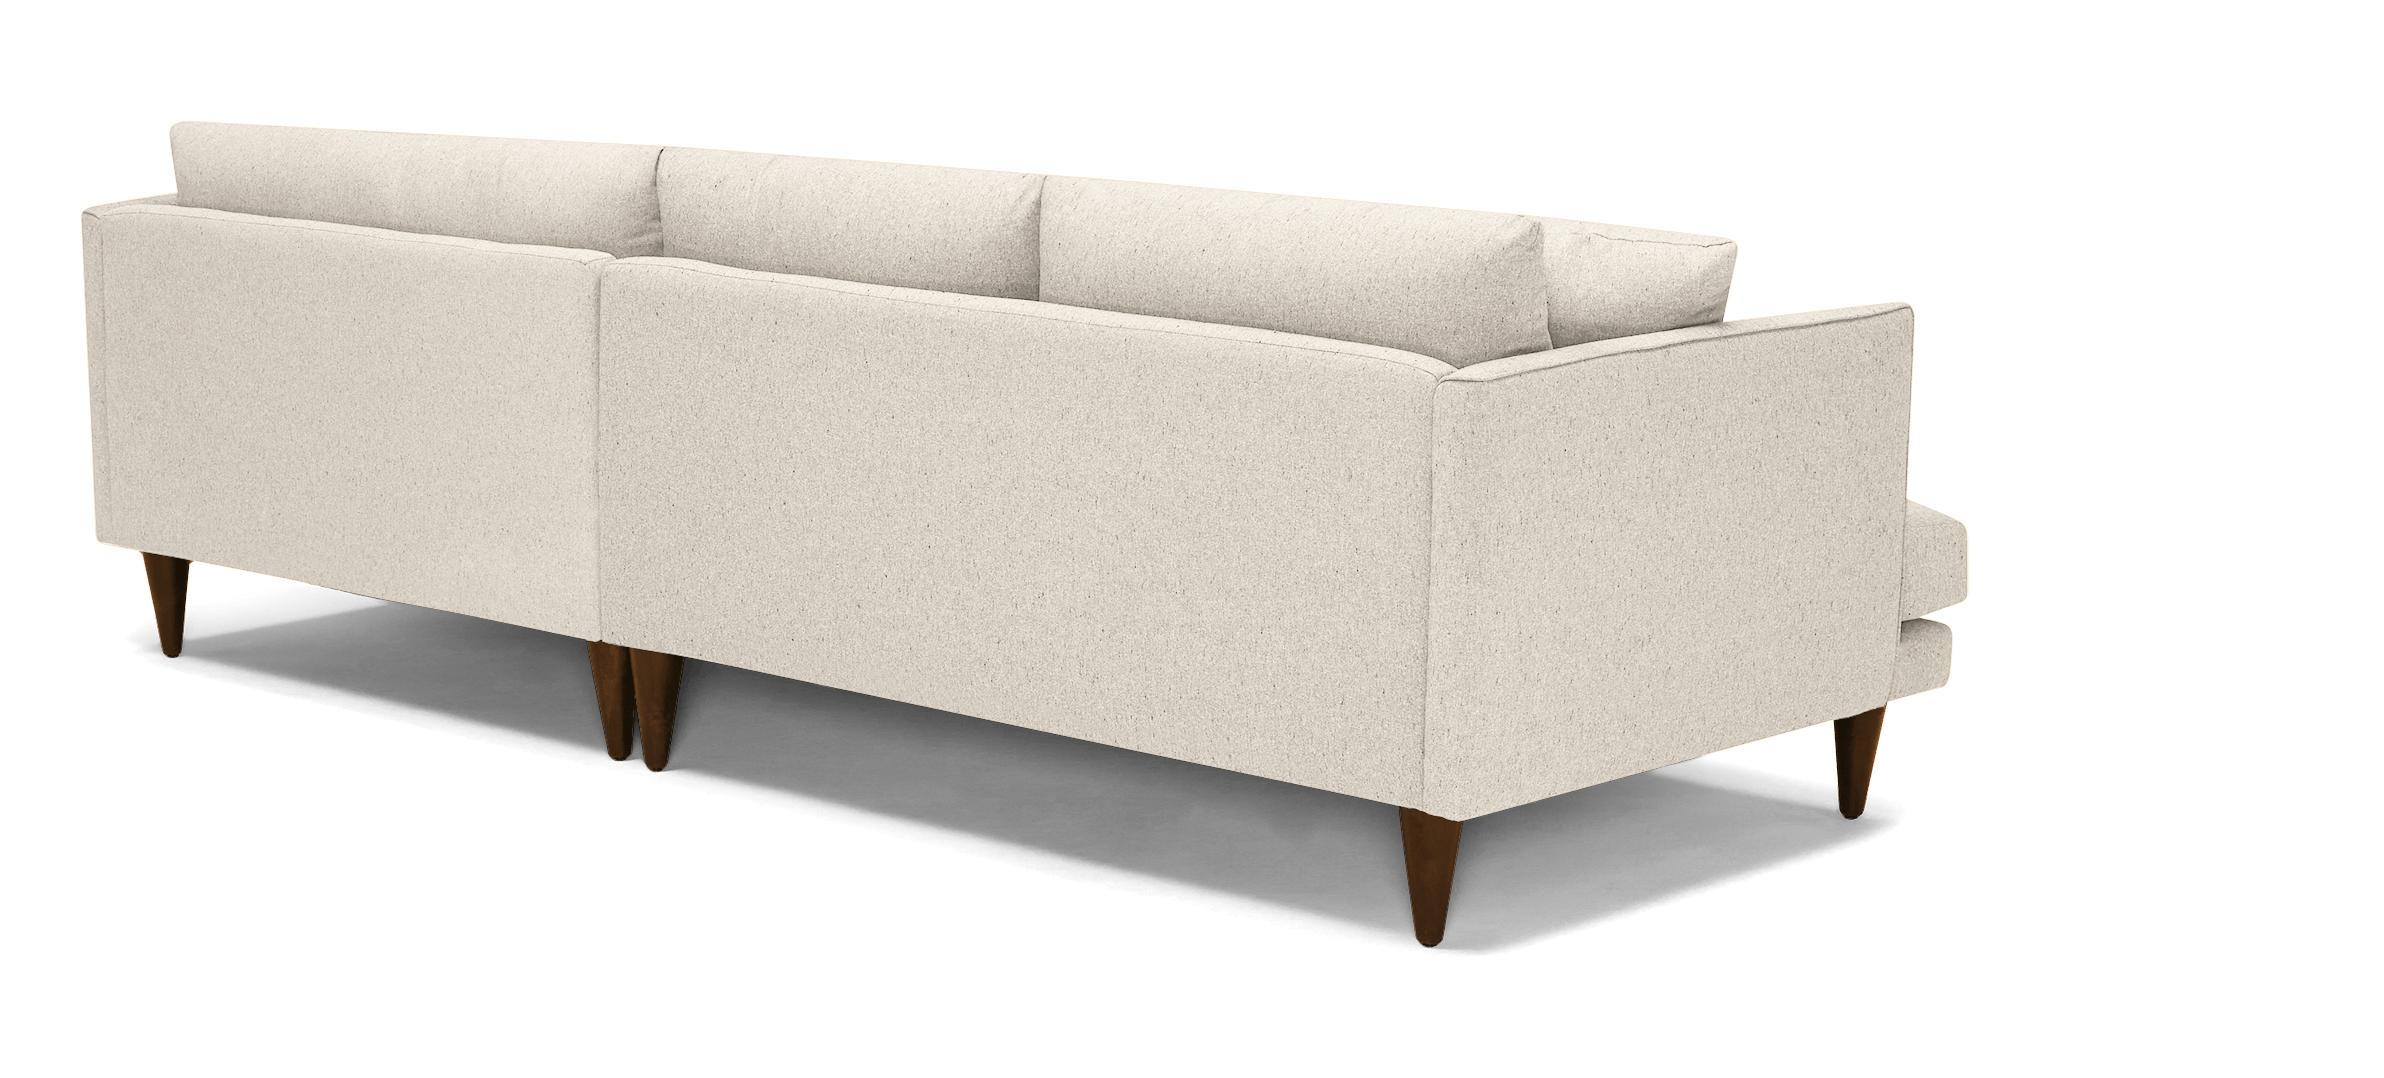 Beige/White Lewis Mid Century Modern Sectional - Cody Sandstone - Mocha - Right - Cone - Image 3